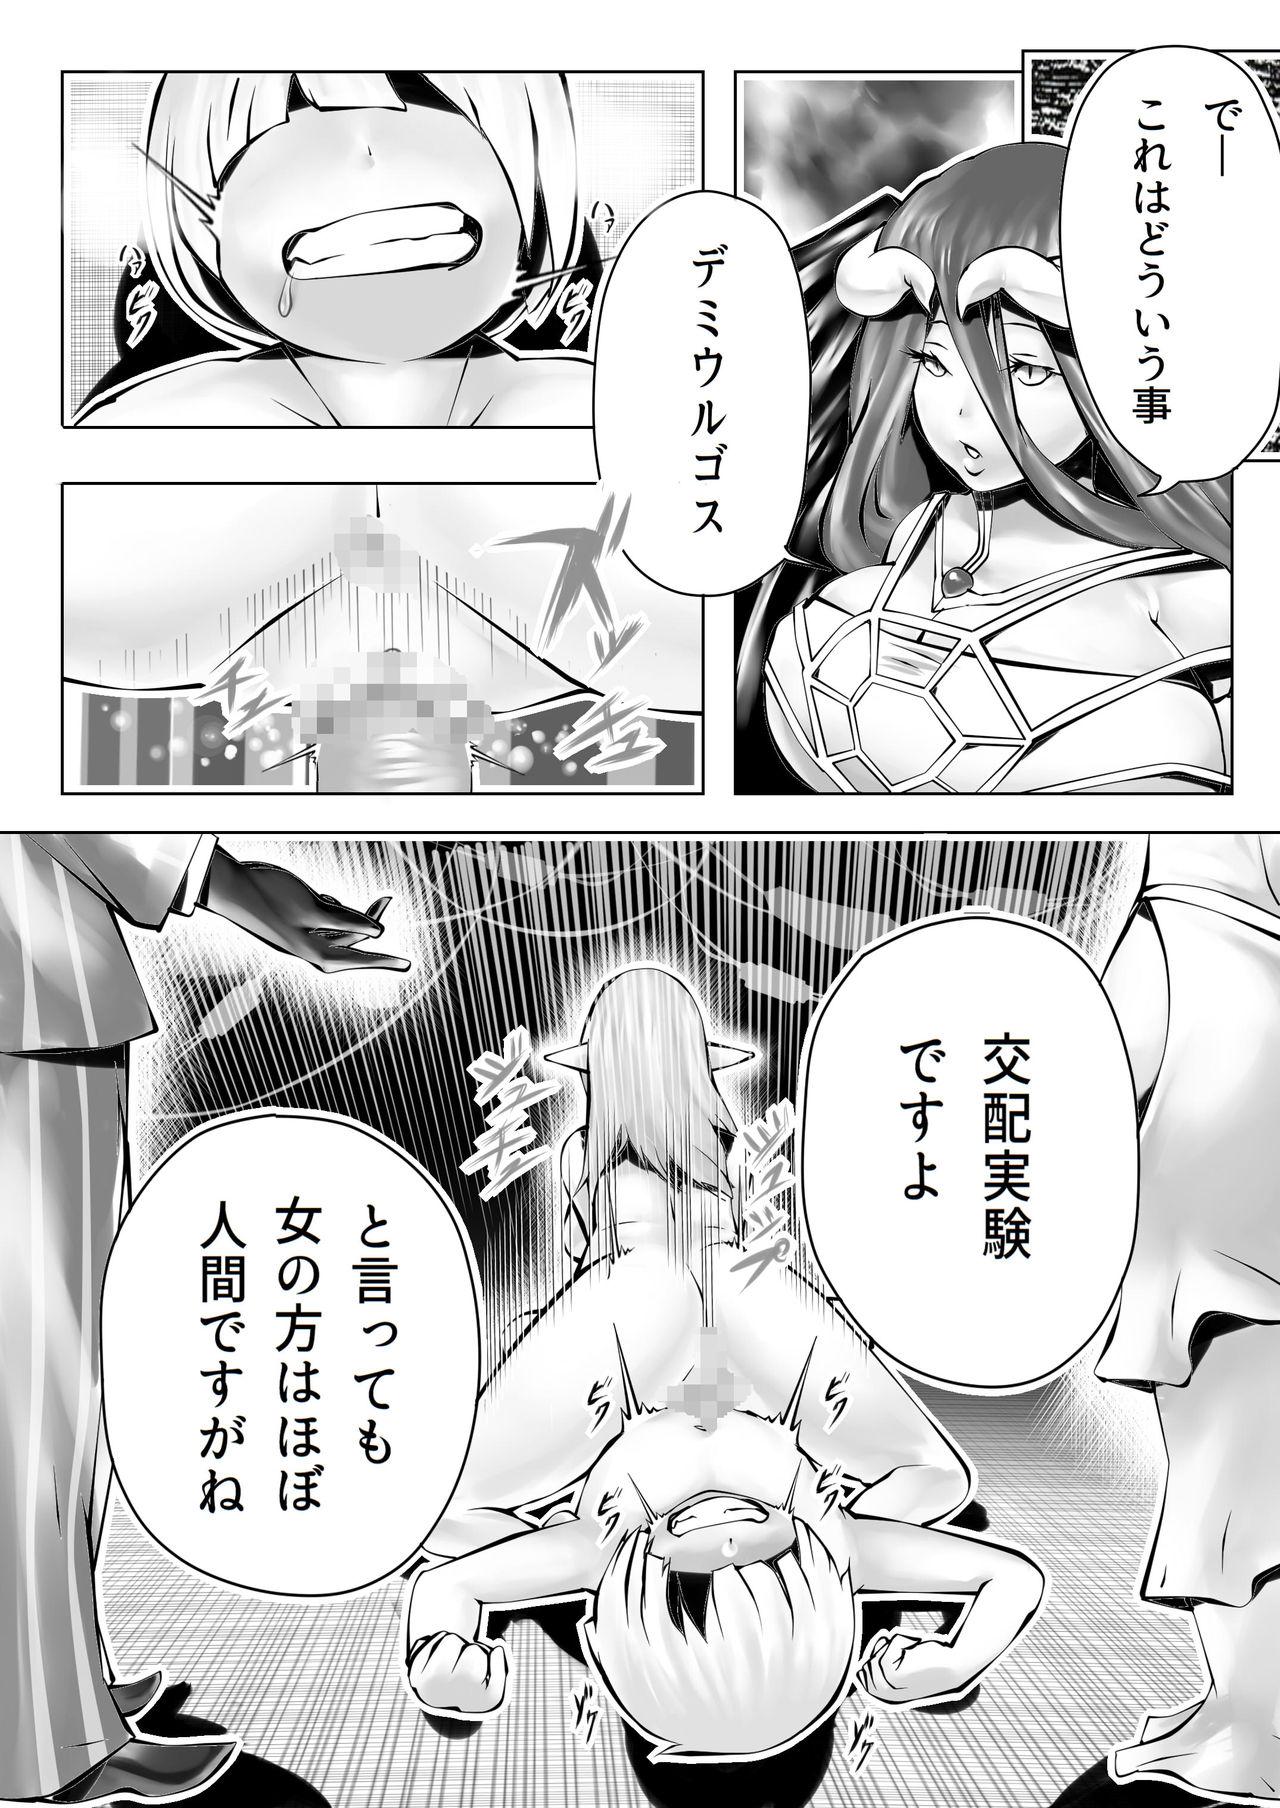 Blond Nfirea x Albedo - Overlord Bang Bros - Page 3